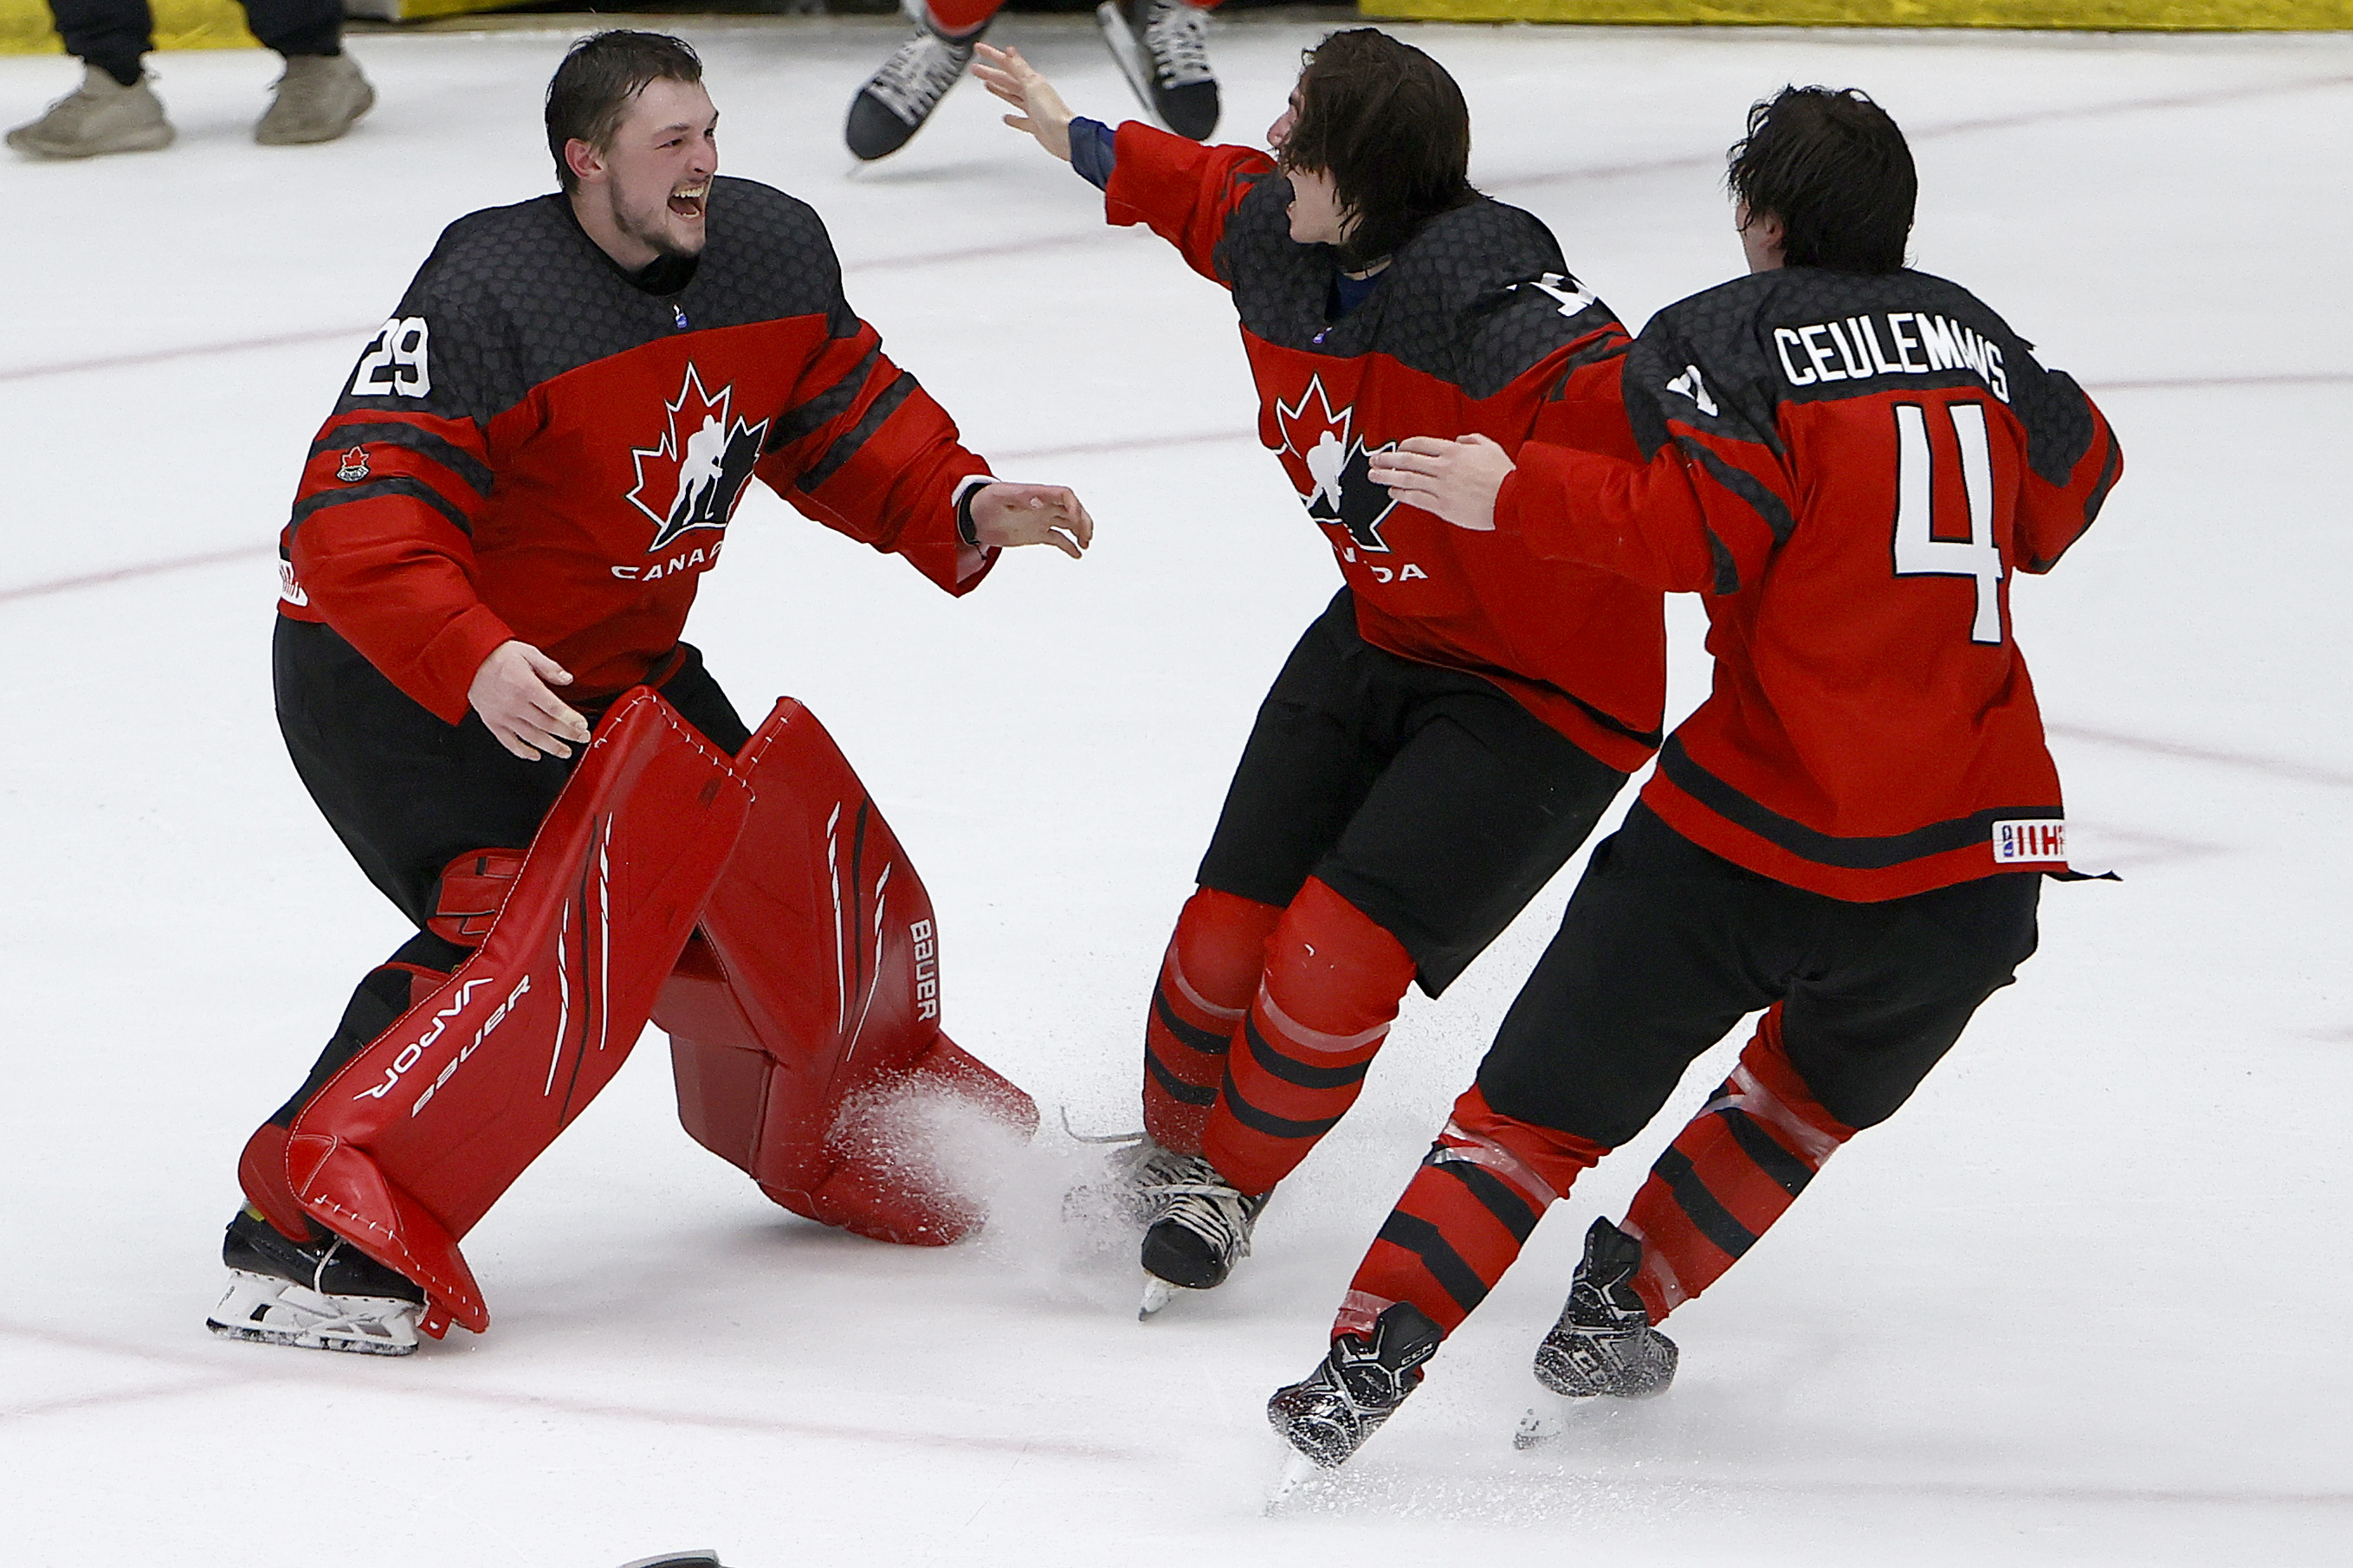 Benjamin Gaudreau #29 of Canada, Conner Roulette #12 of Canada and Corson Ceulemans #4 of Canada celebrate after defeating Russia 5-3 in the 2021 IIHF Ice Hockey U18 World Championship Gold Medal Game at Comerica Center on May 06, 2021 in Frisco, Texas.